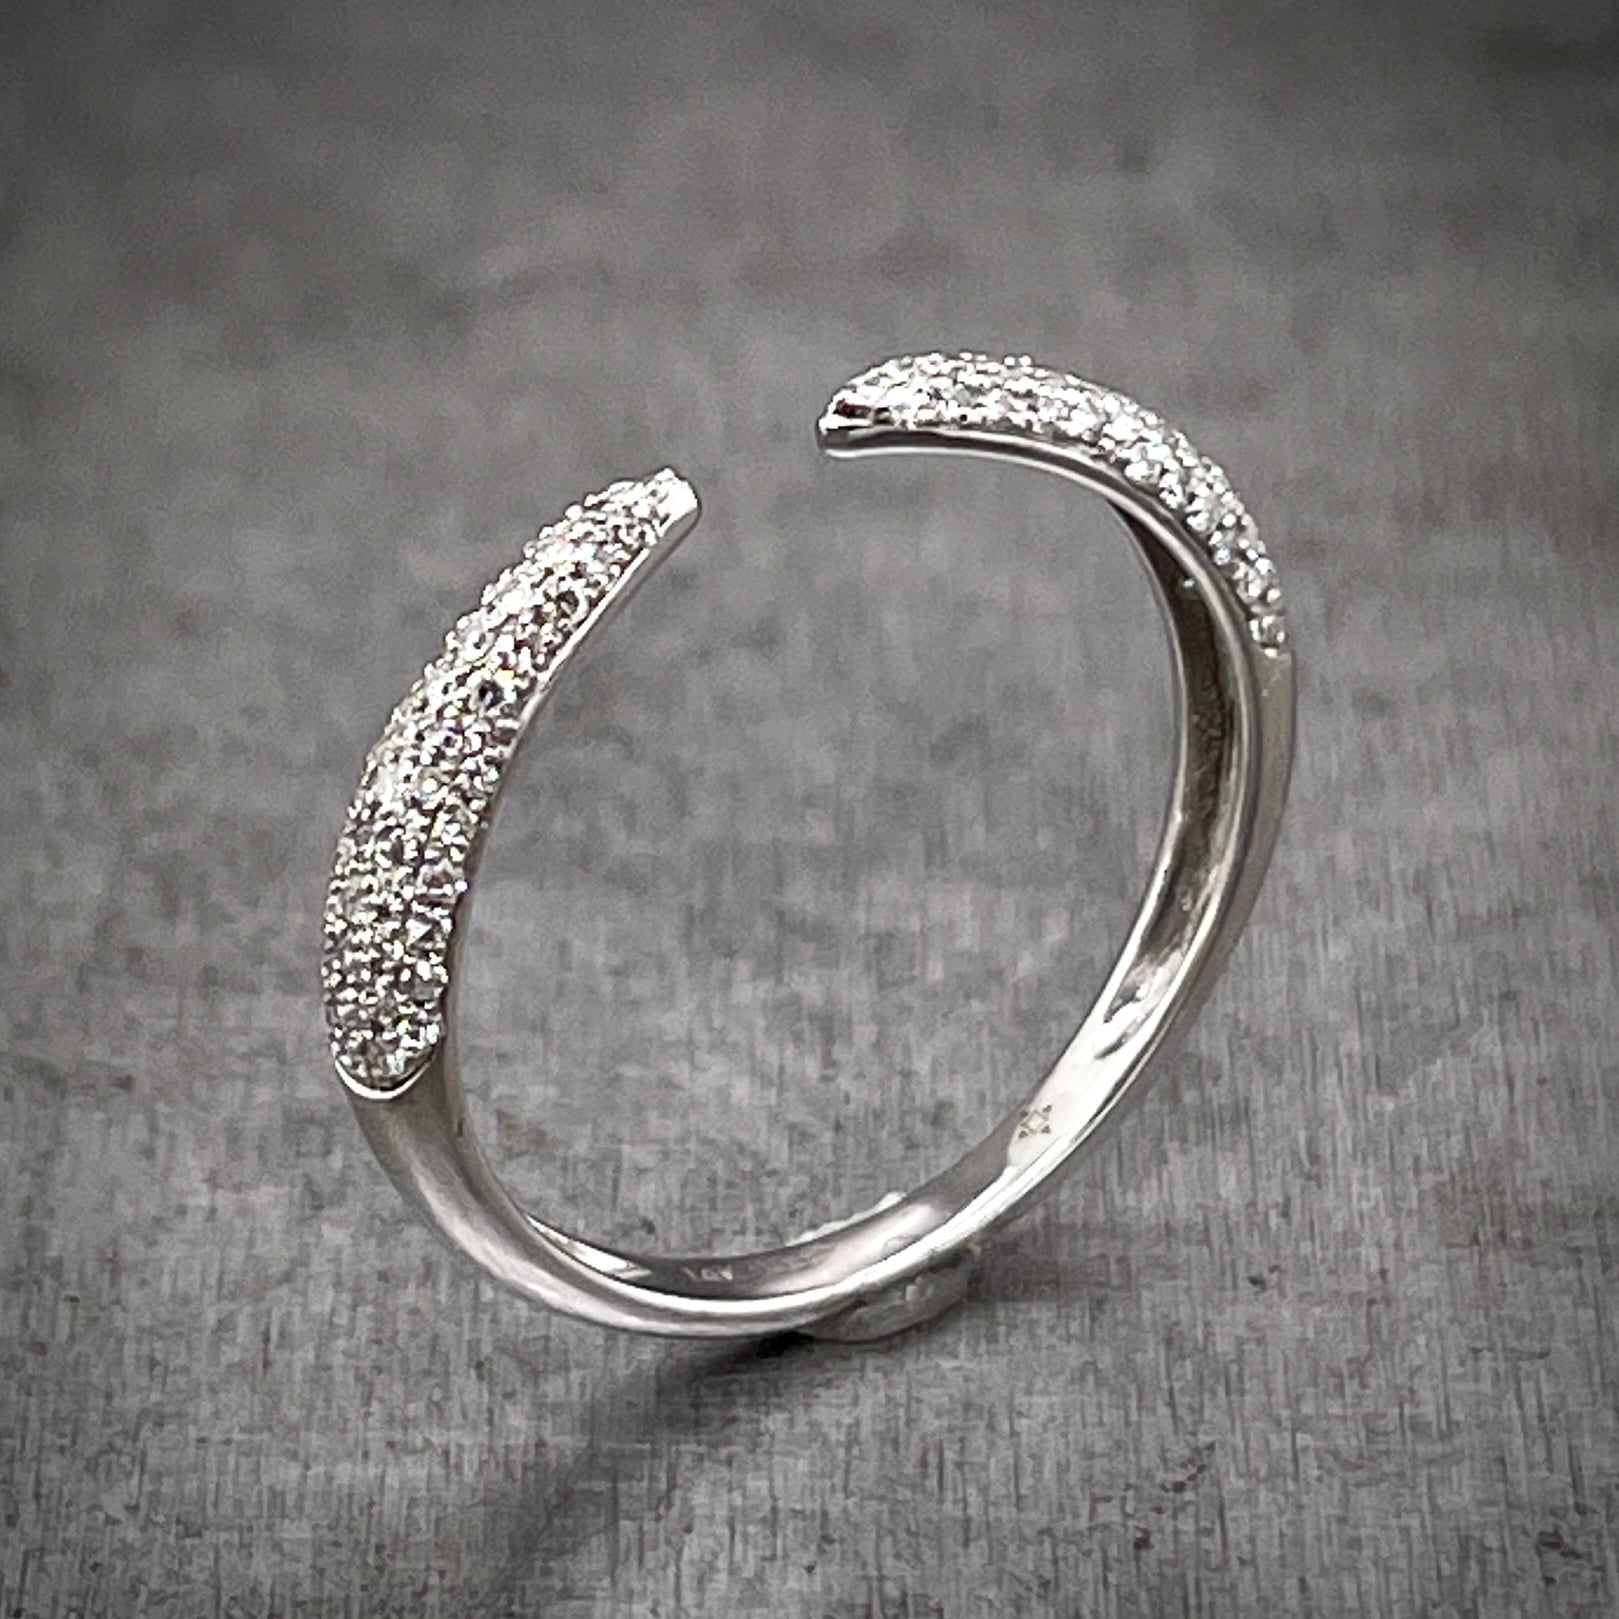 Angled aerial view of single diamond claw ring. Made from 14 karat white gold this ring features what looks like two claws that wrap around a finger and almost touch one-another but stop, leaving a space between them. There are round brilliant diamonds set in the shoulder of the ring.